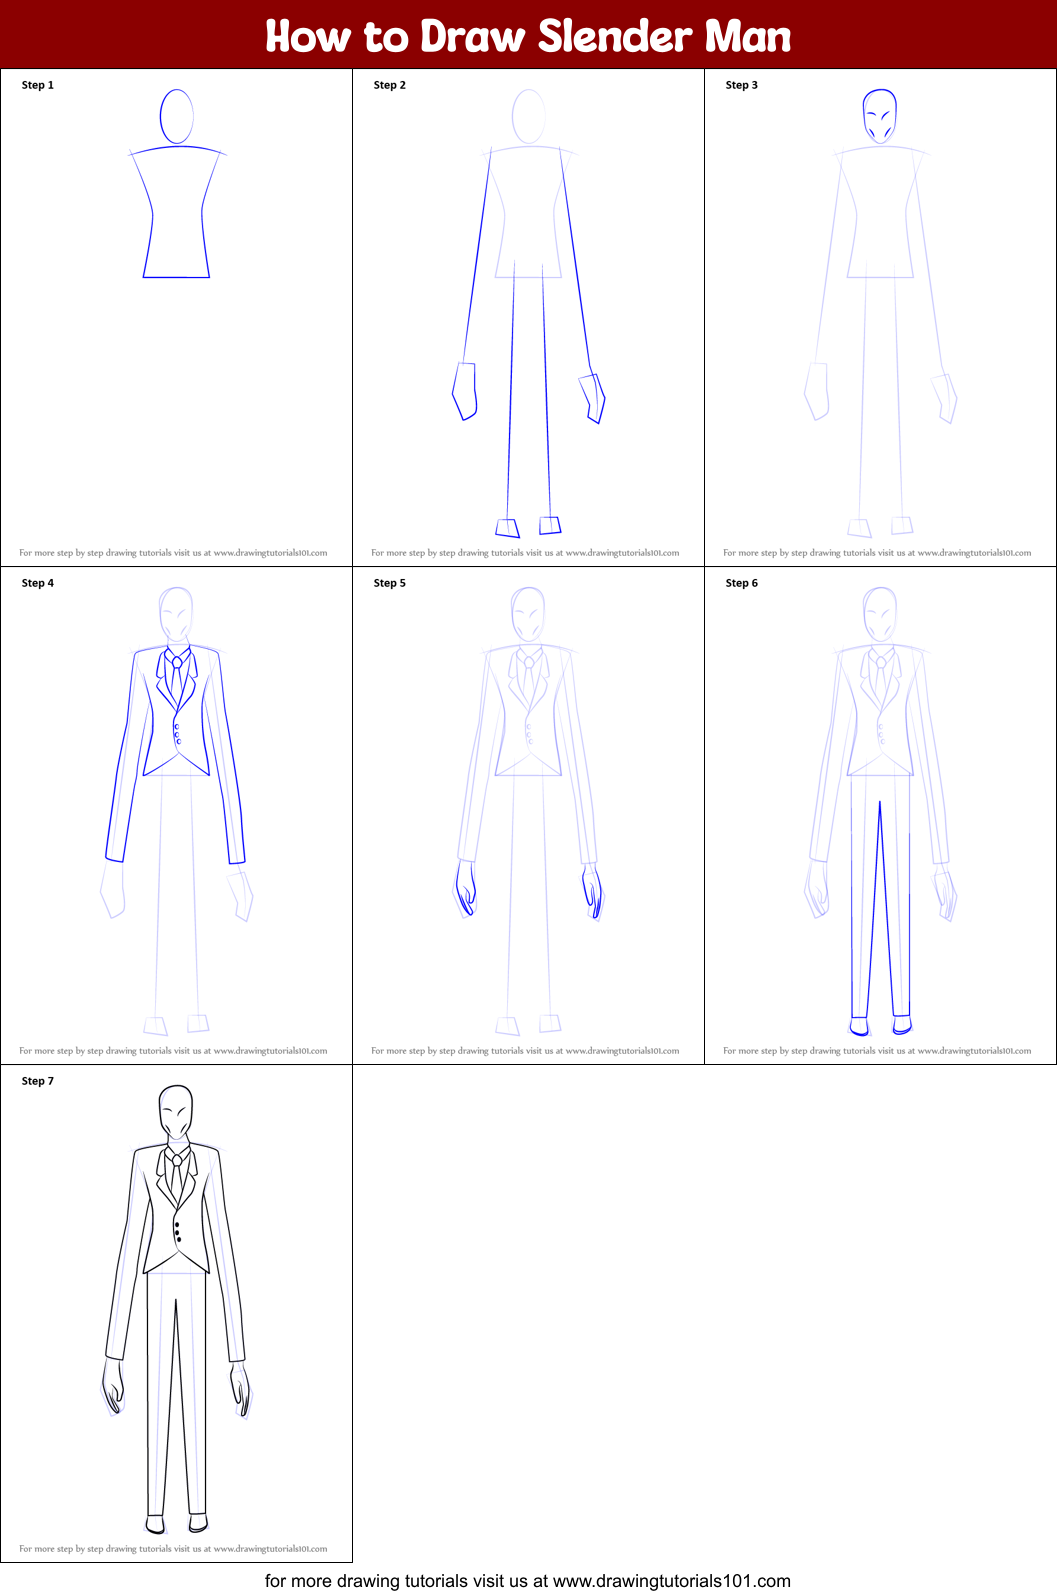 How to Draw Slender Man printable step by step drawing sheet